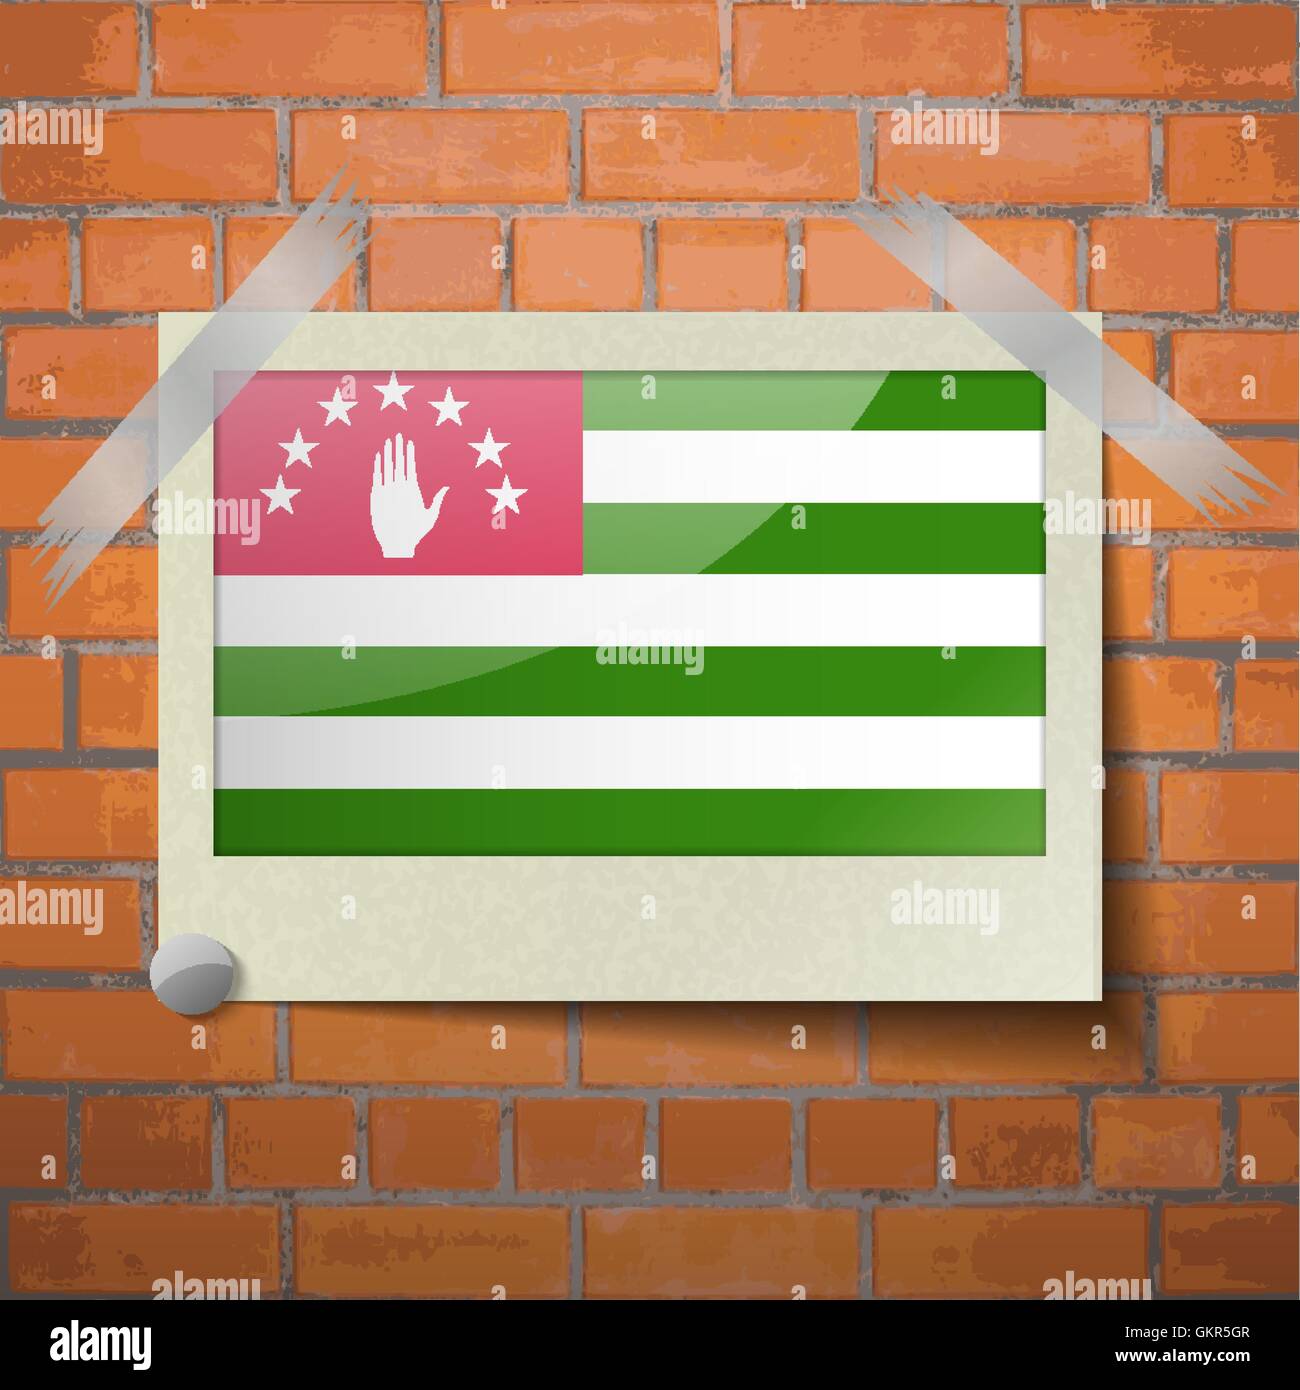 Flag of Abkhazia. Flat design scotch taped to a red brick wall Stock Vector